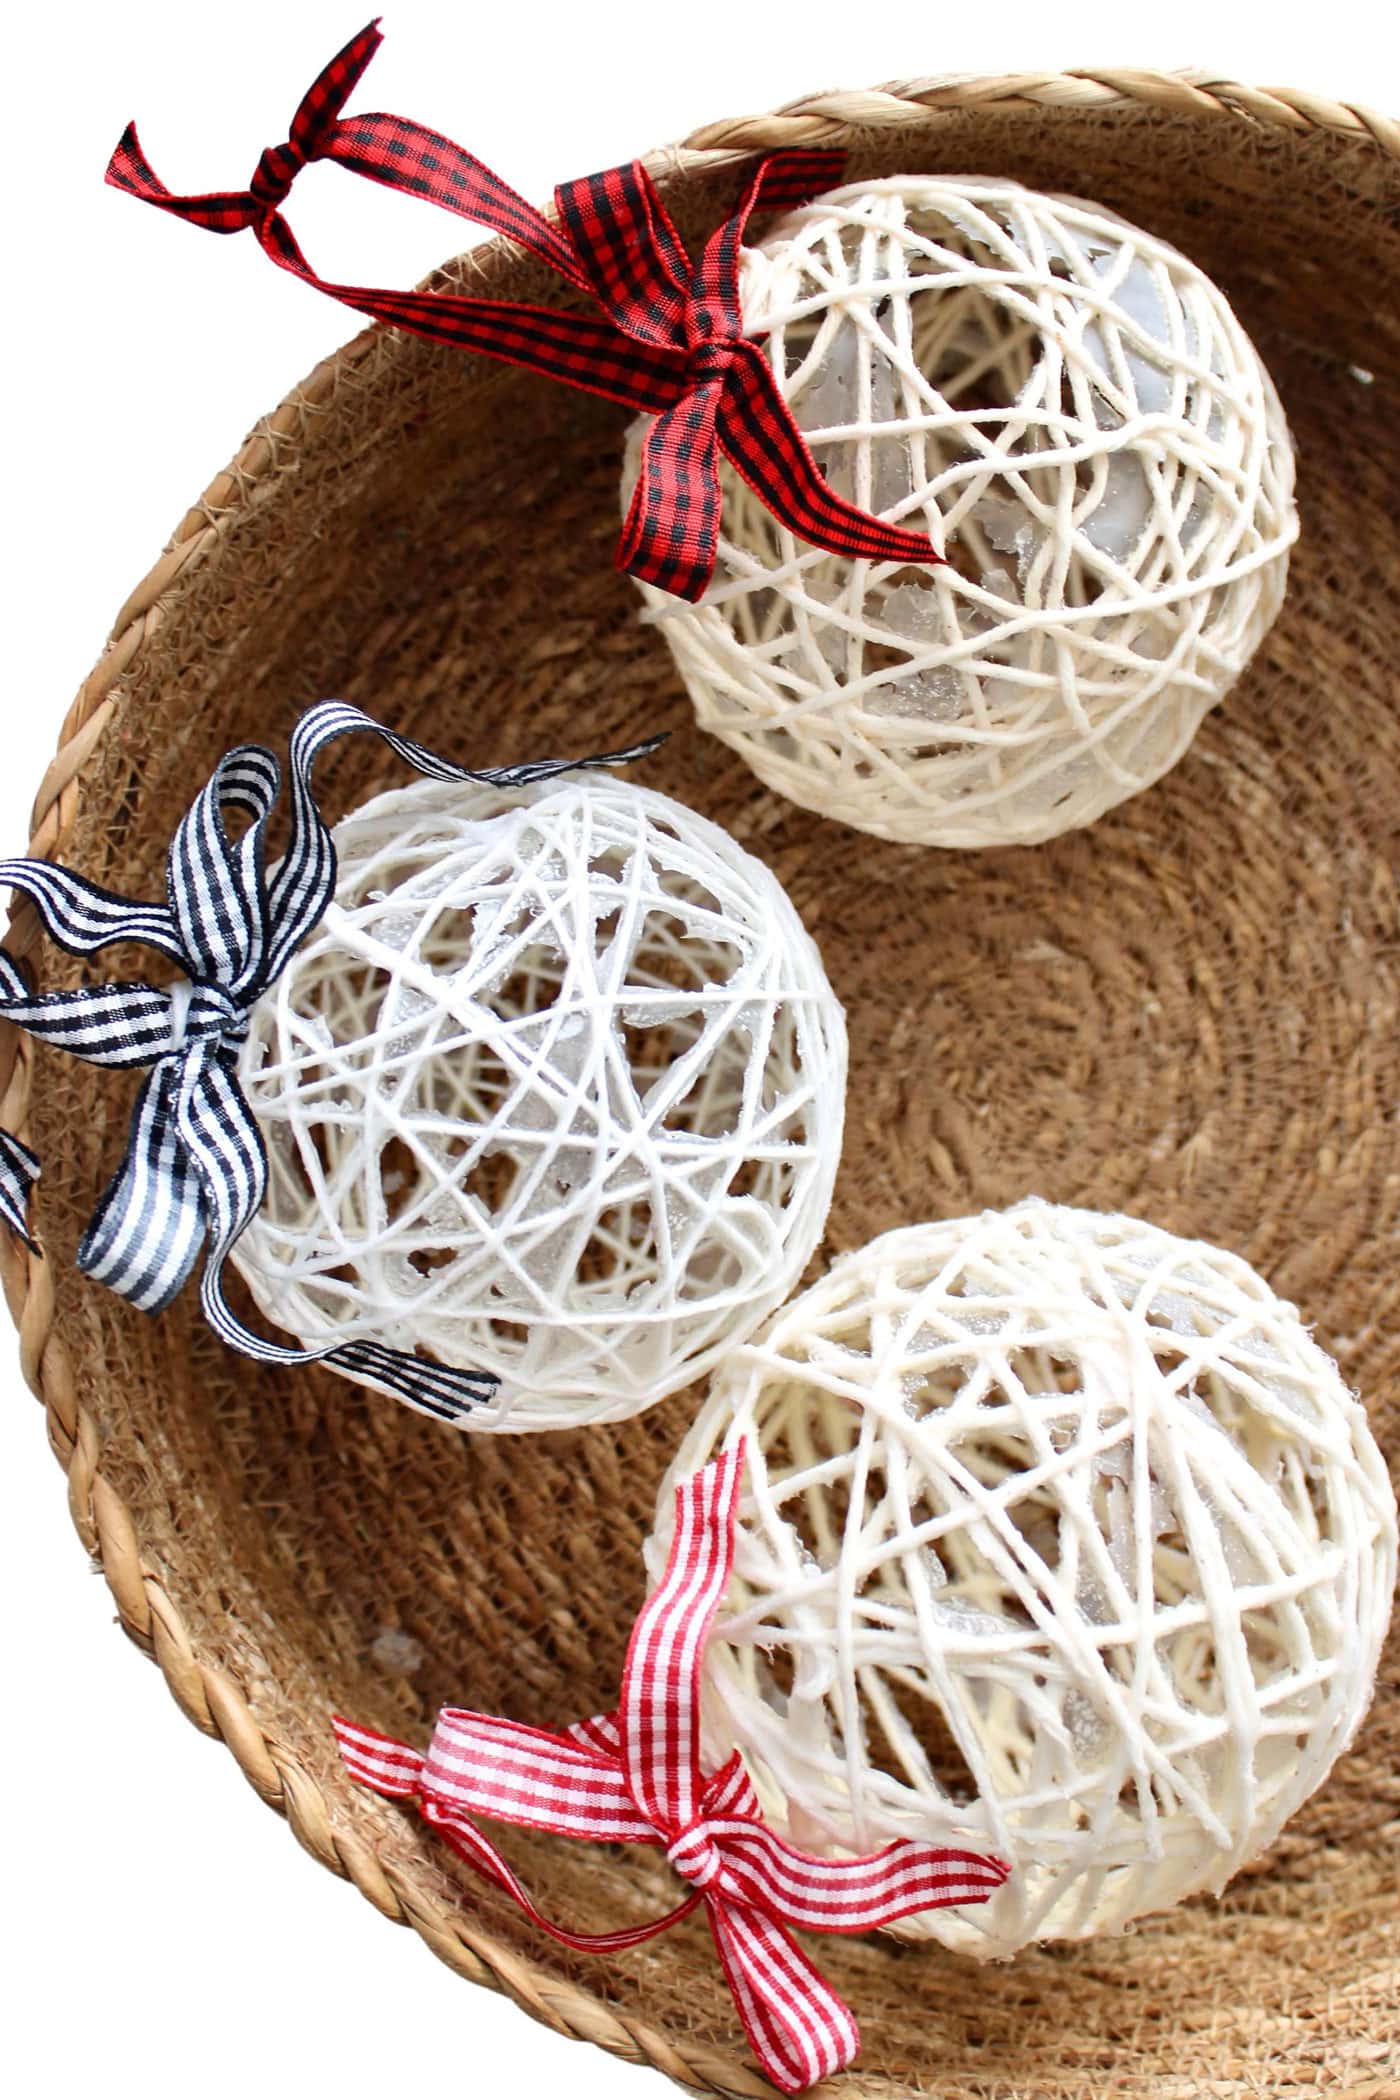 How to Make String Christmas Ornaments